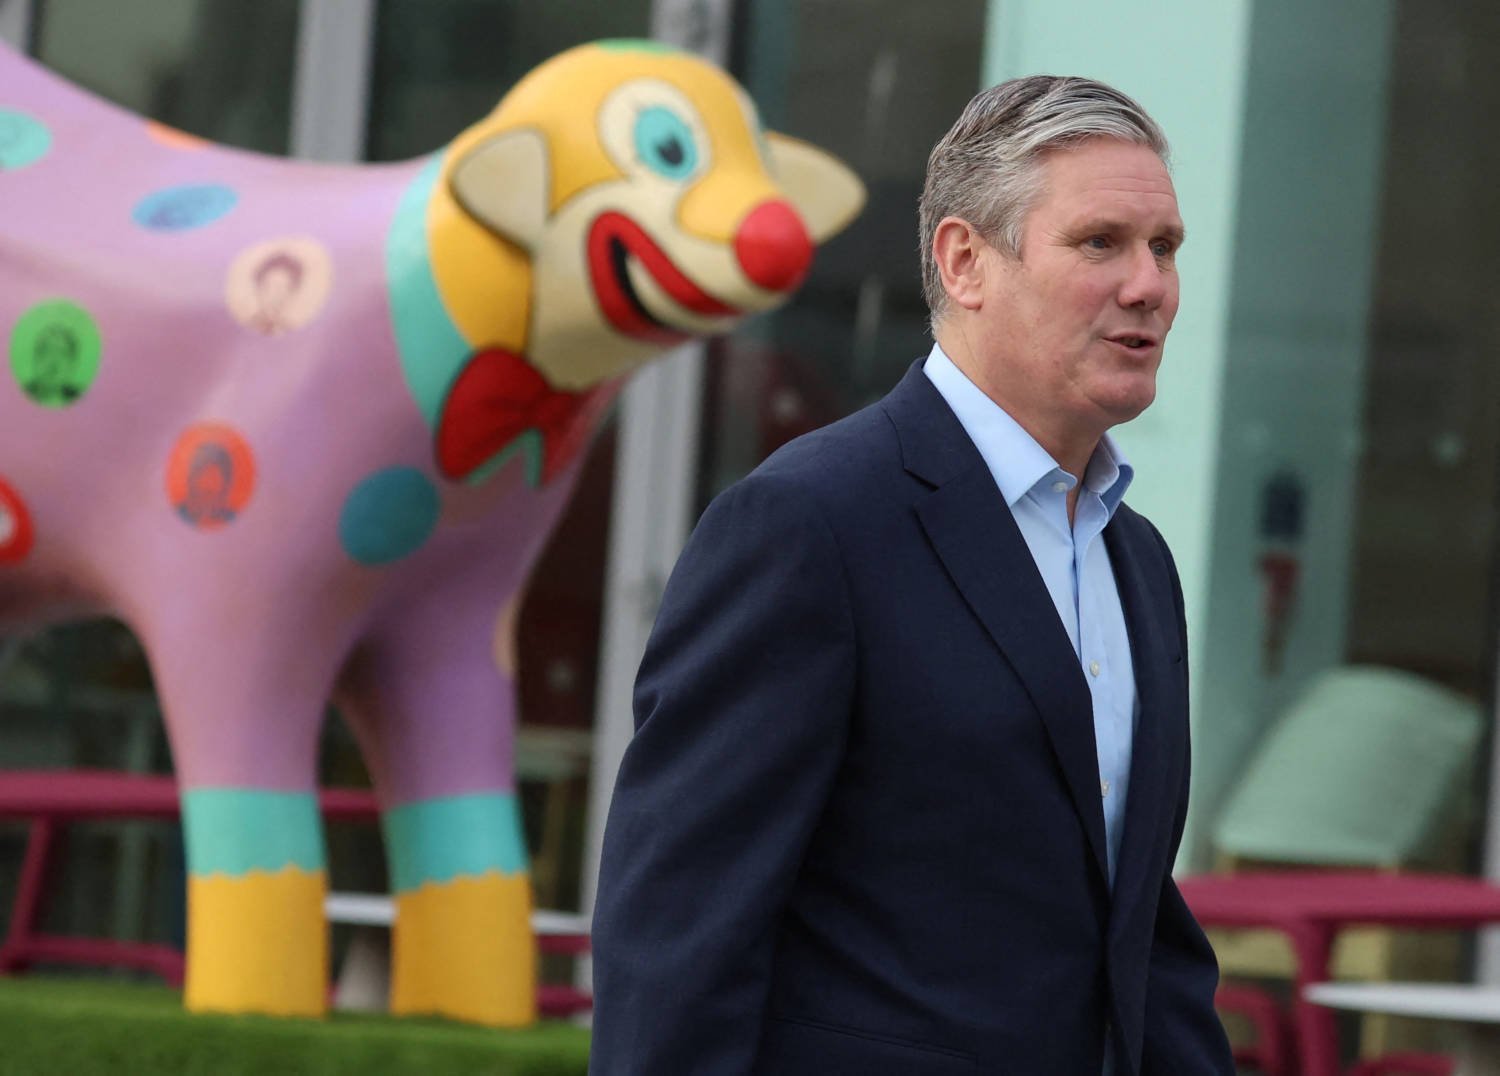 Britain's Labour Party Leader Keir Starmer Arrives At The Museum Of Liverpool For Television Interview On The Opening Day Of His Party's Annual Conference In Liverpool, Britain